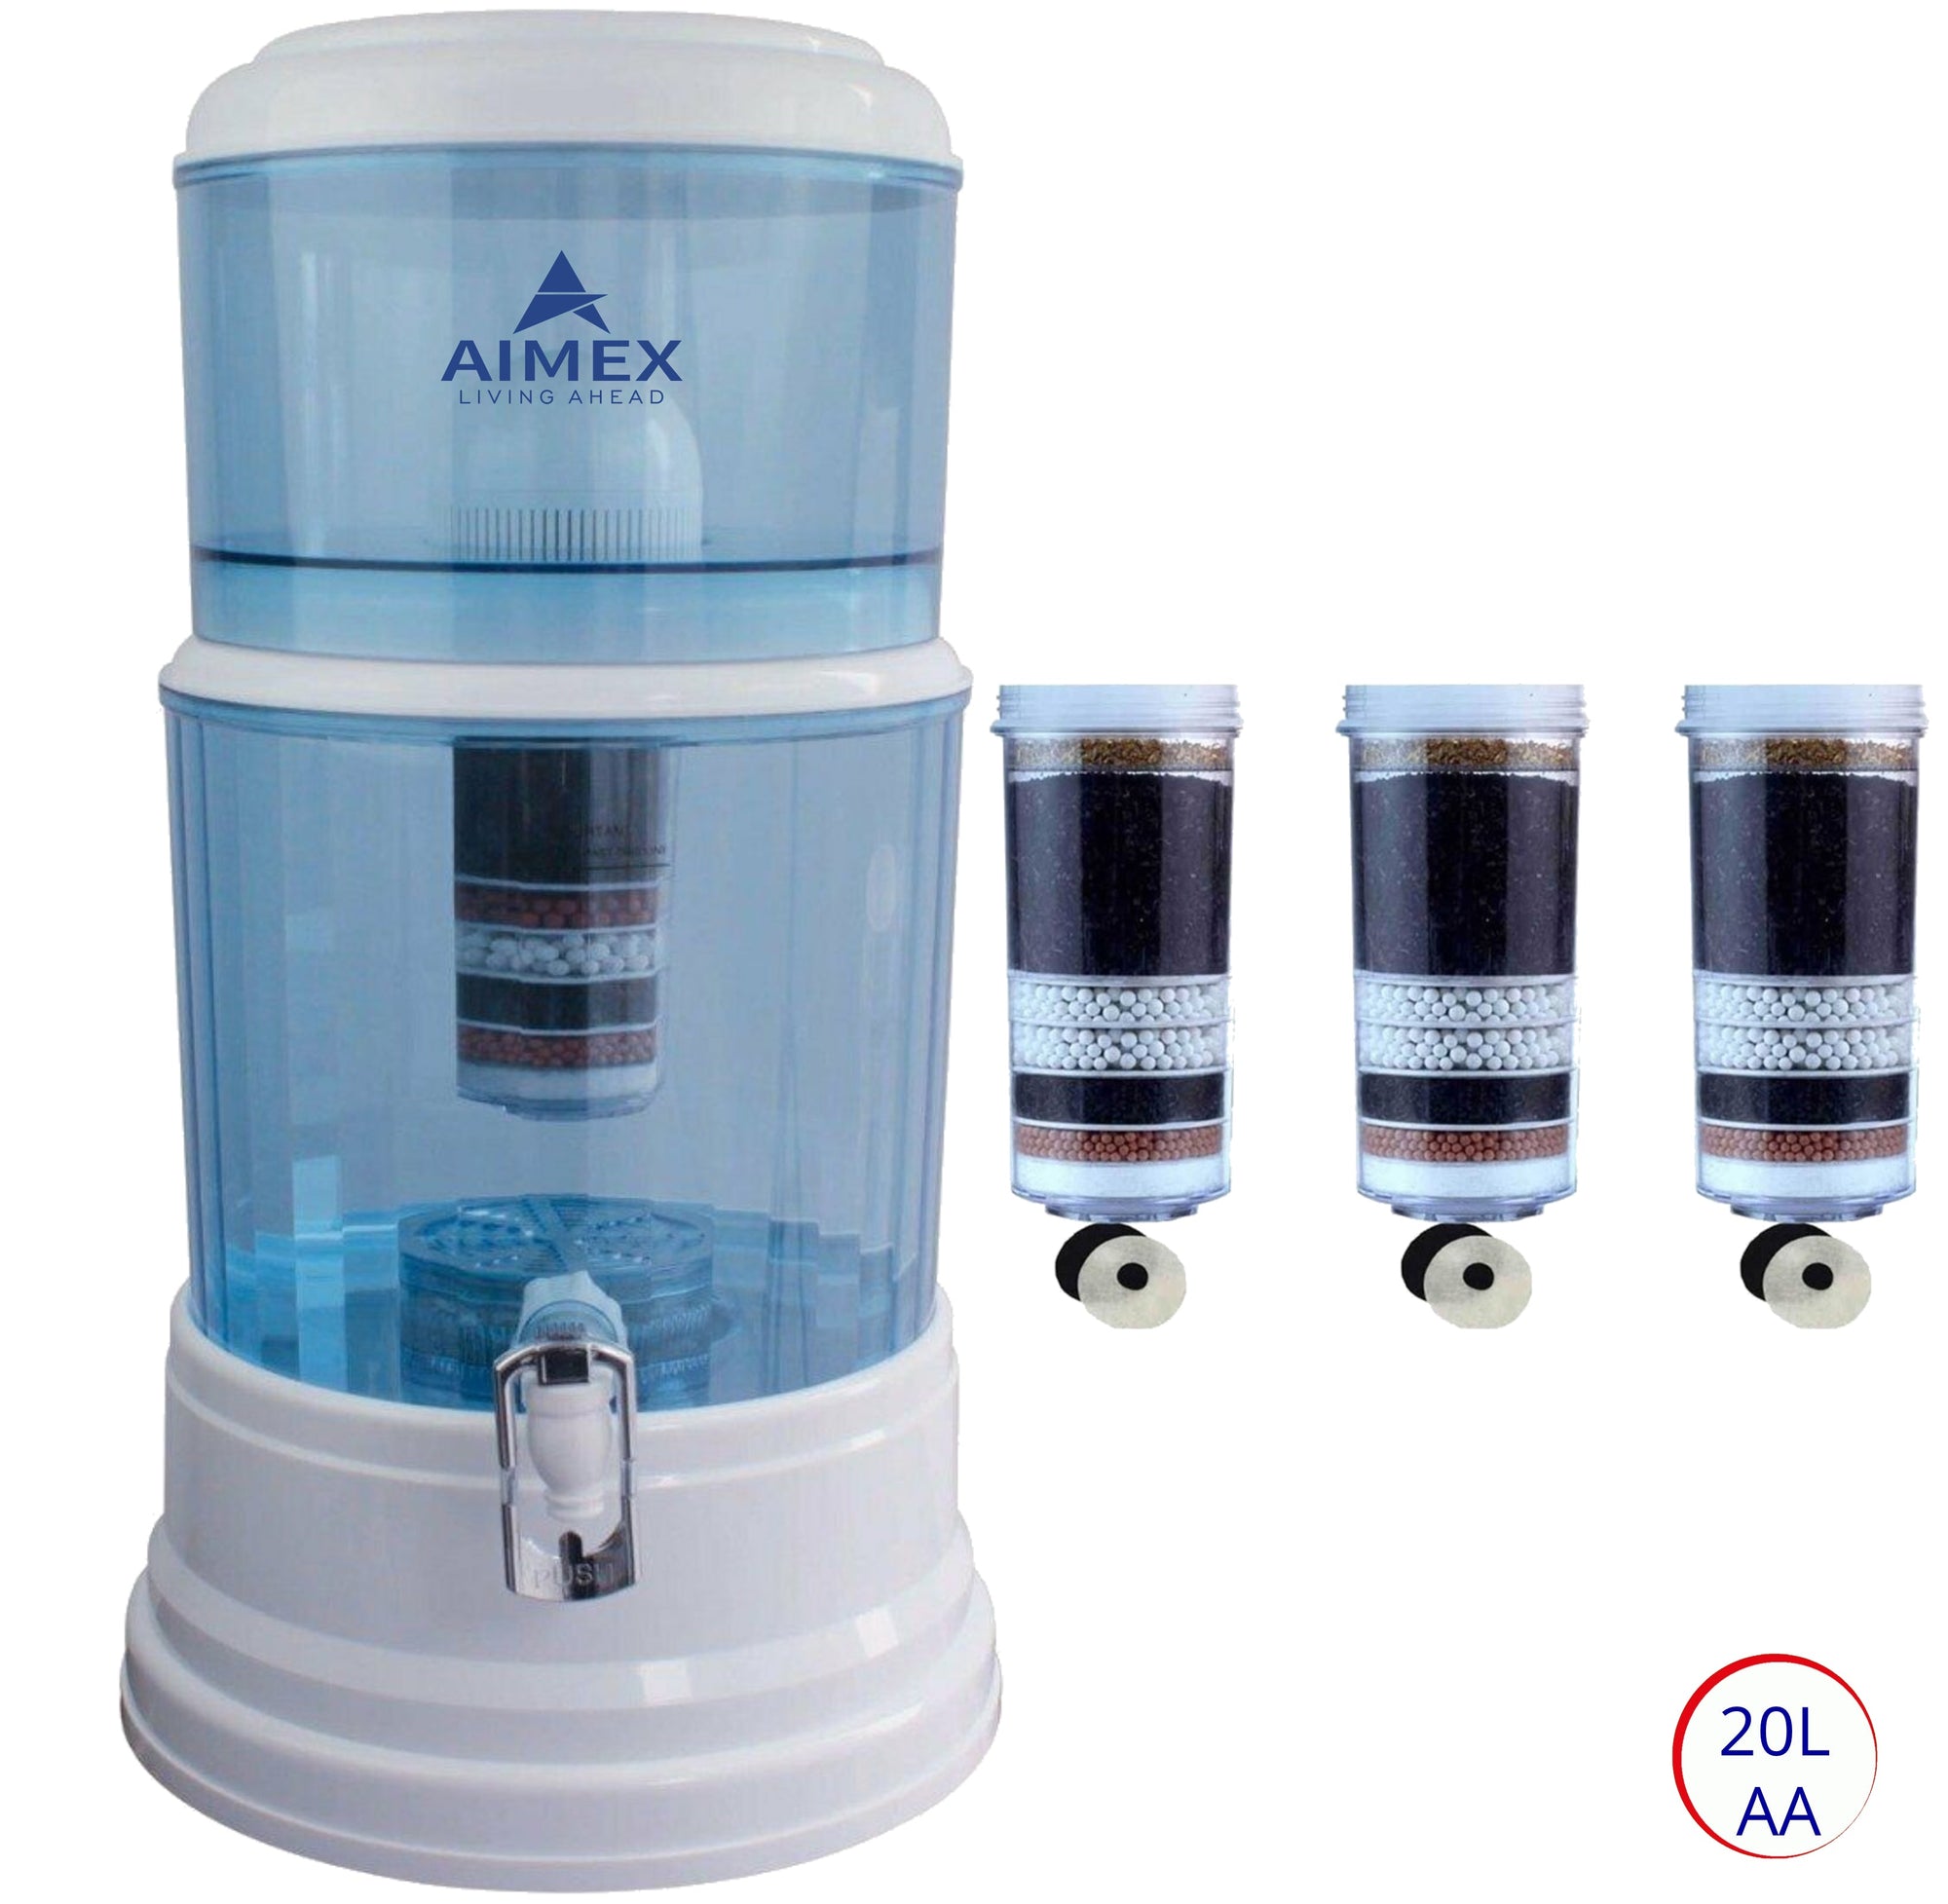 Aimex 20L Benchtop Water Purifier Dispenser with Maifan Stone and 3 Fluoride Filters